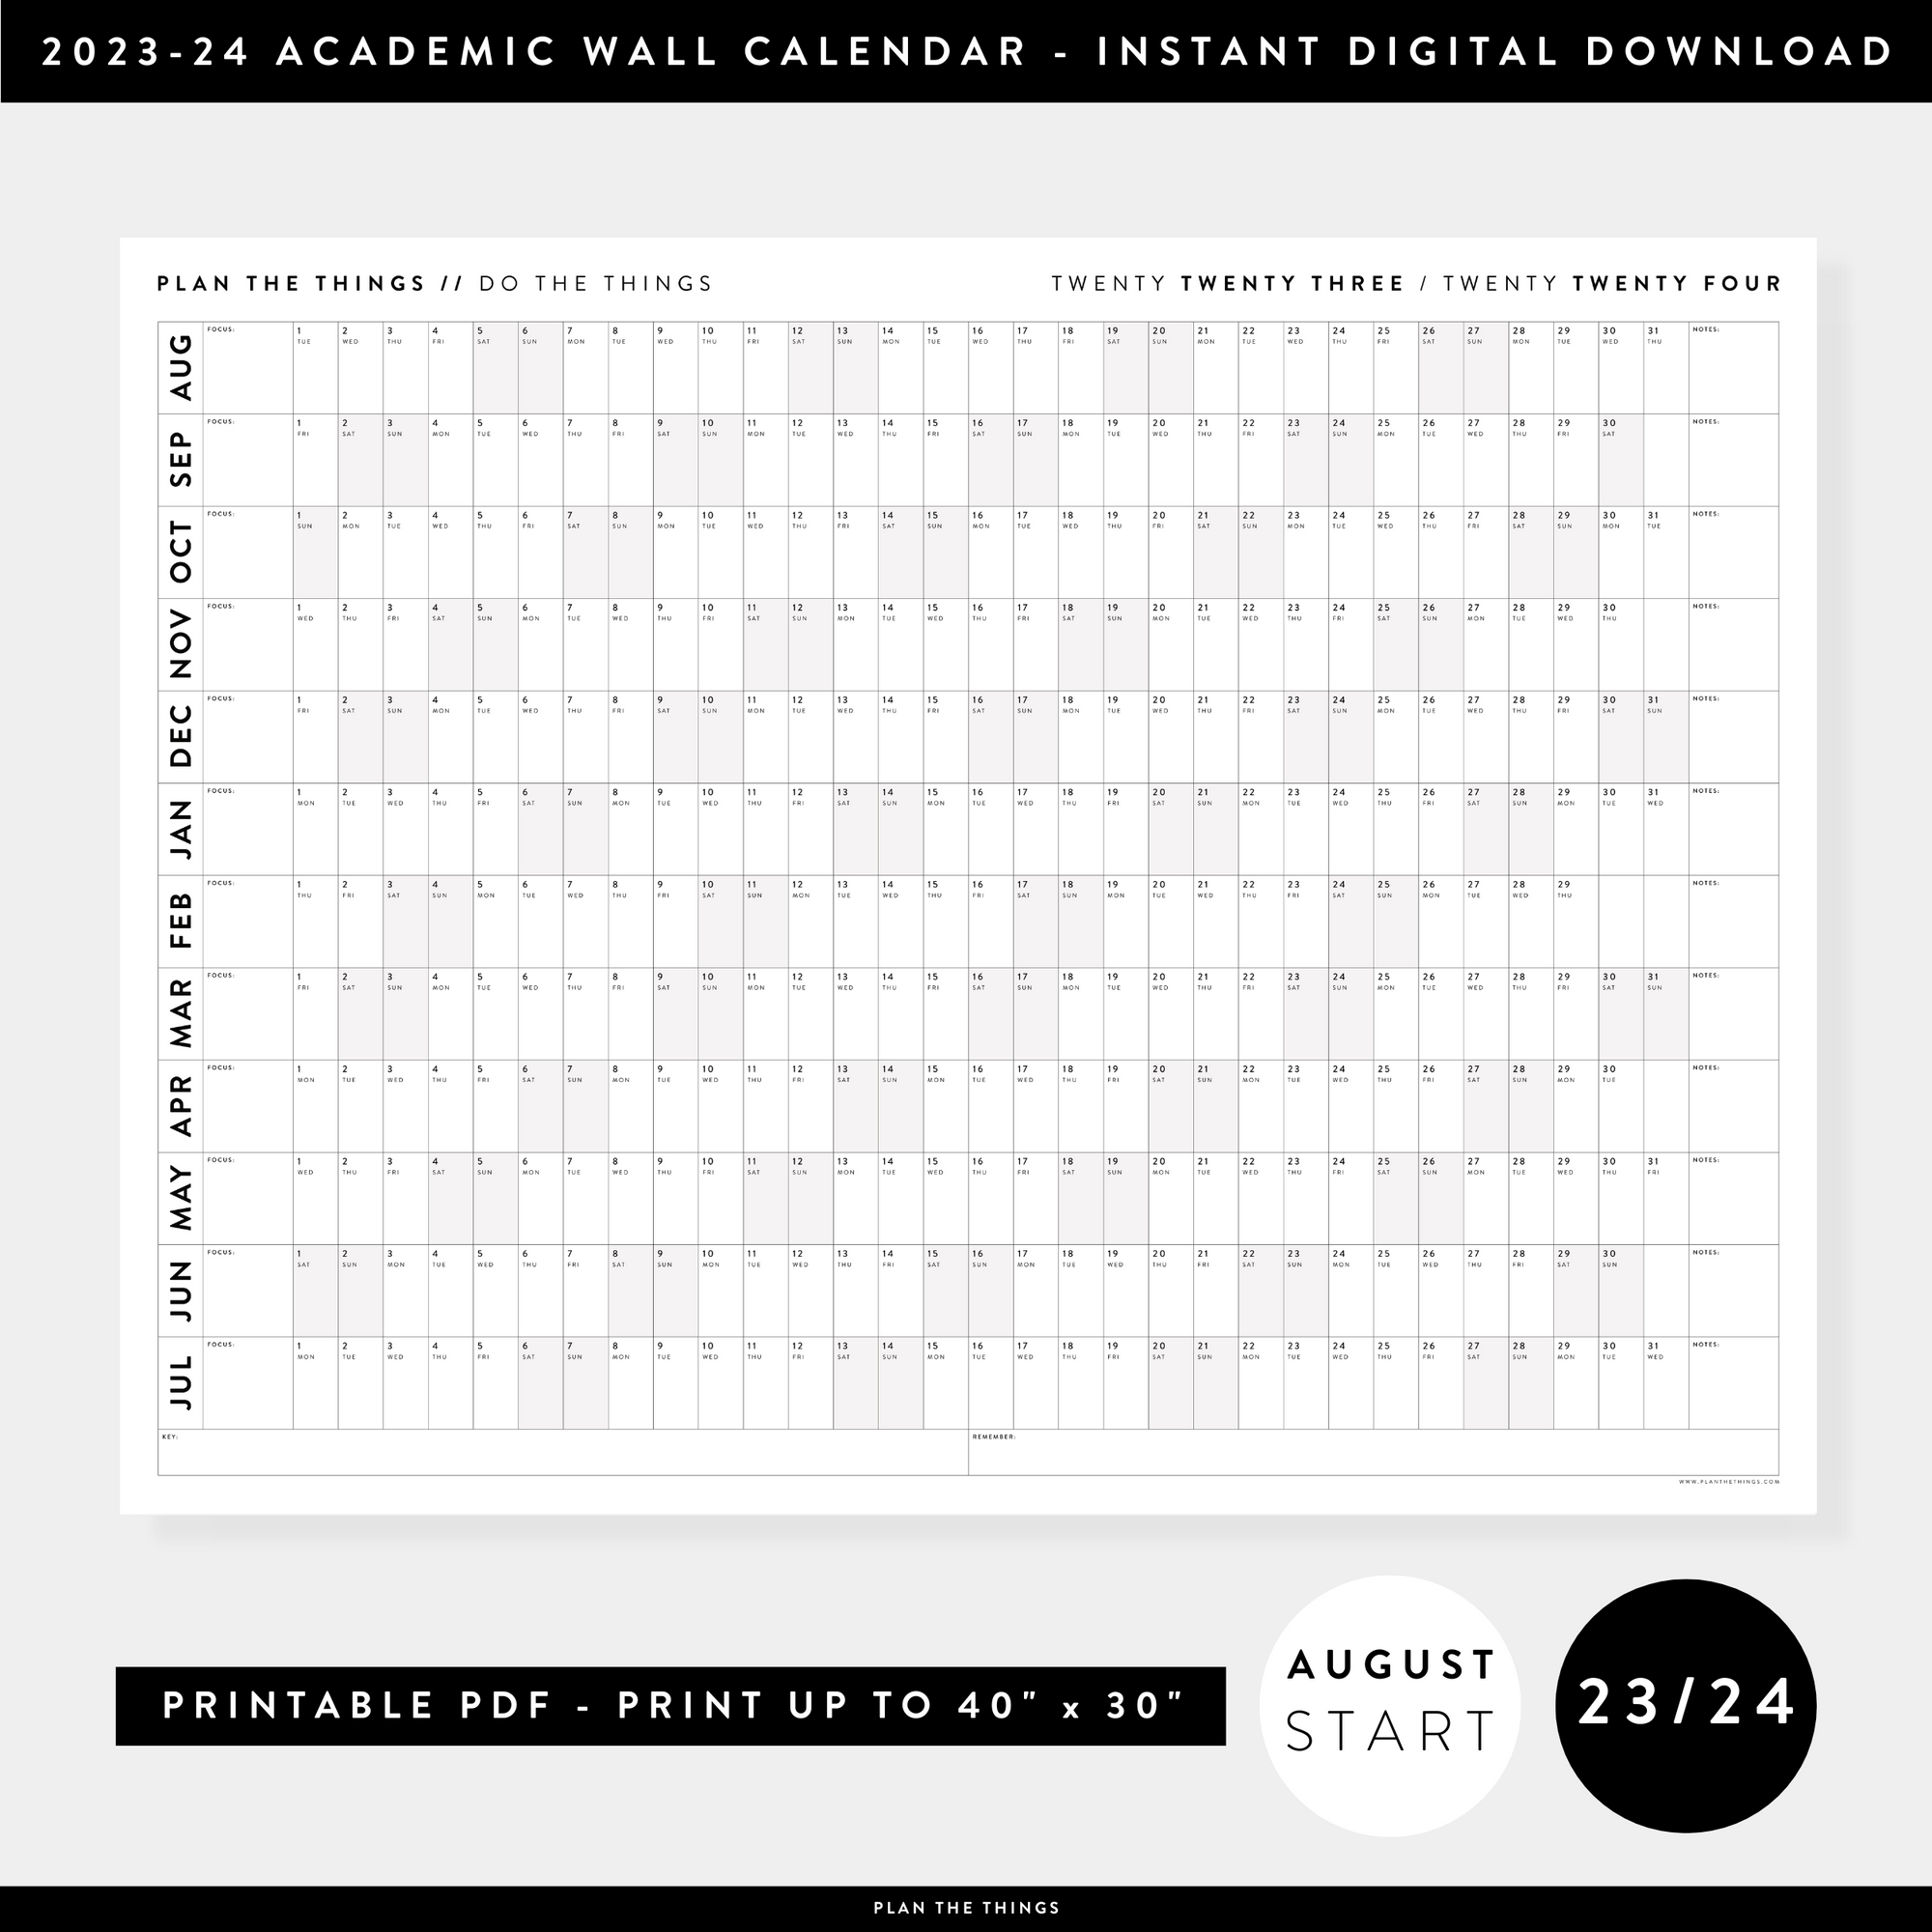 PRINTABLE 2023 / 2024 ACADEMIC WALL CALENDAR (AUGUST START) | HORIZONTAL WITH GRAY / GREY WEEKENDS - INSTANT DOWNLOAD